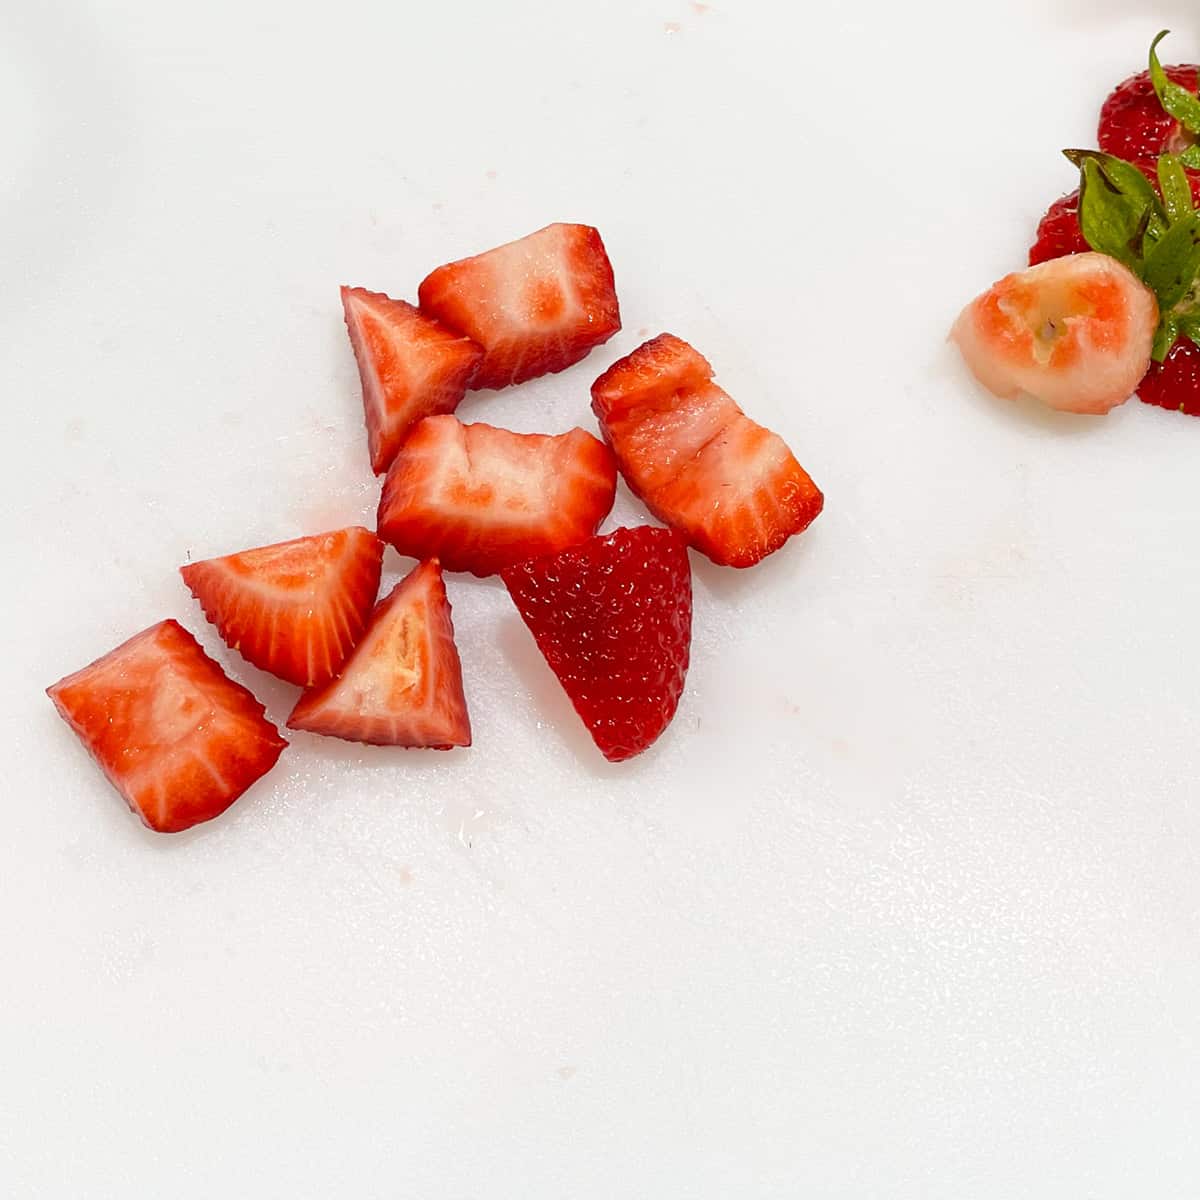 Strawberries are cut up into eight pieces.